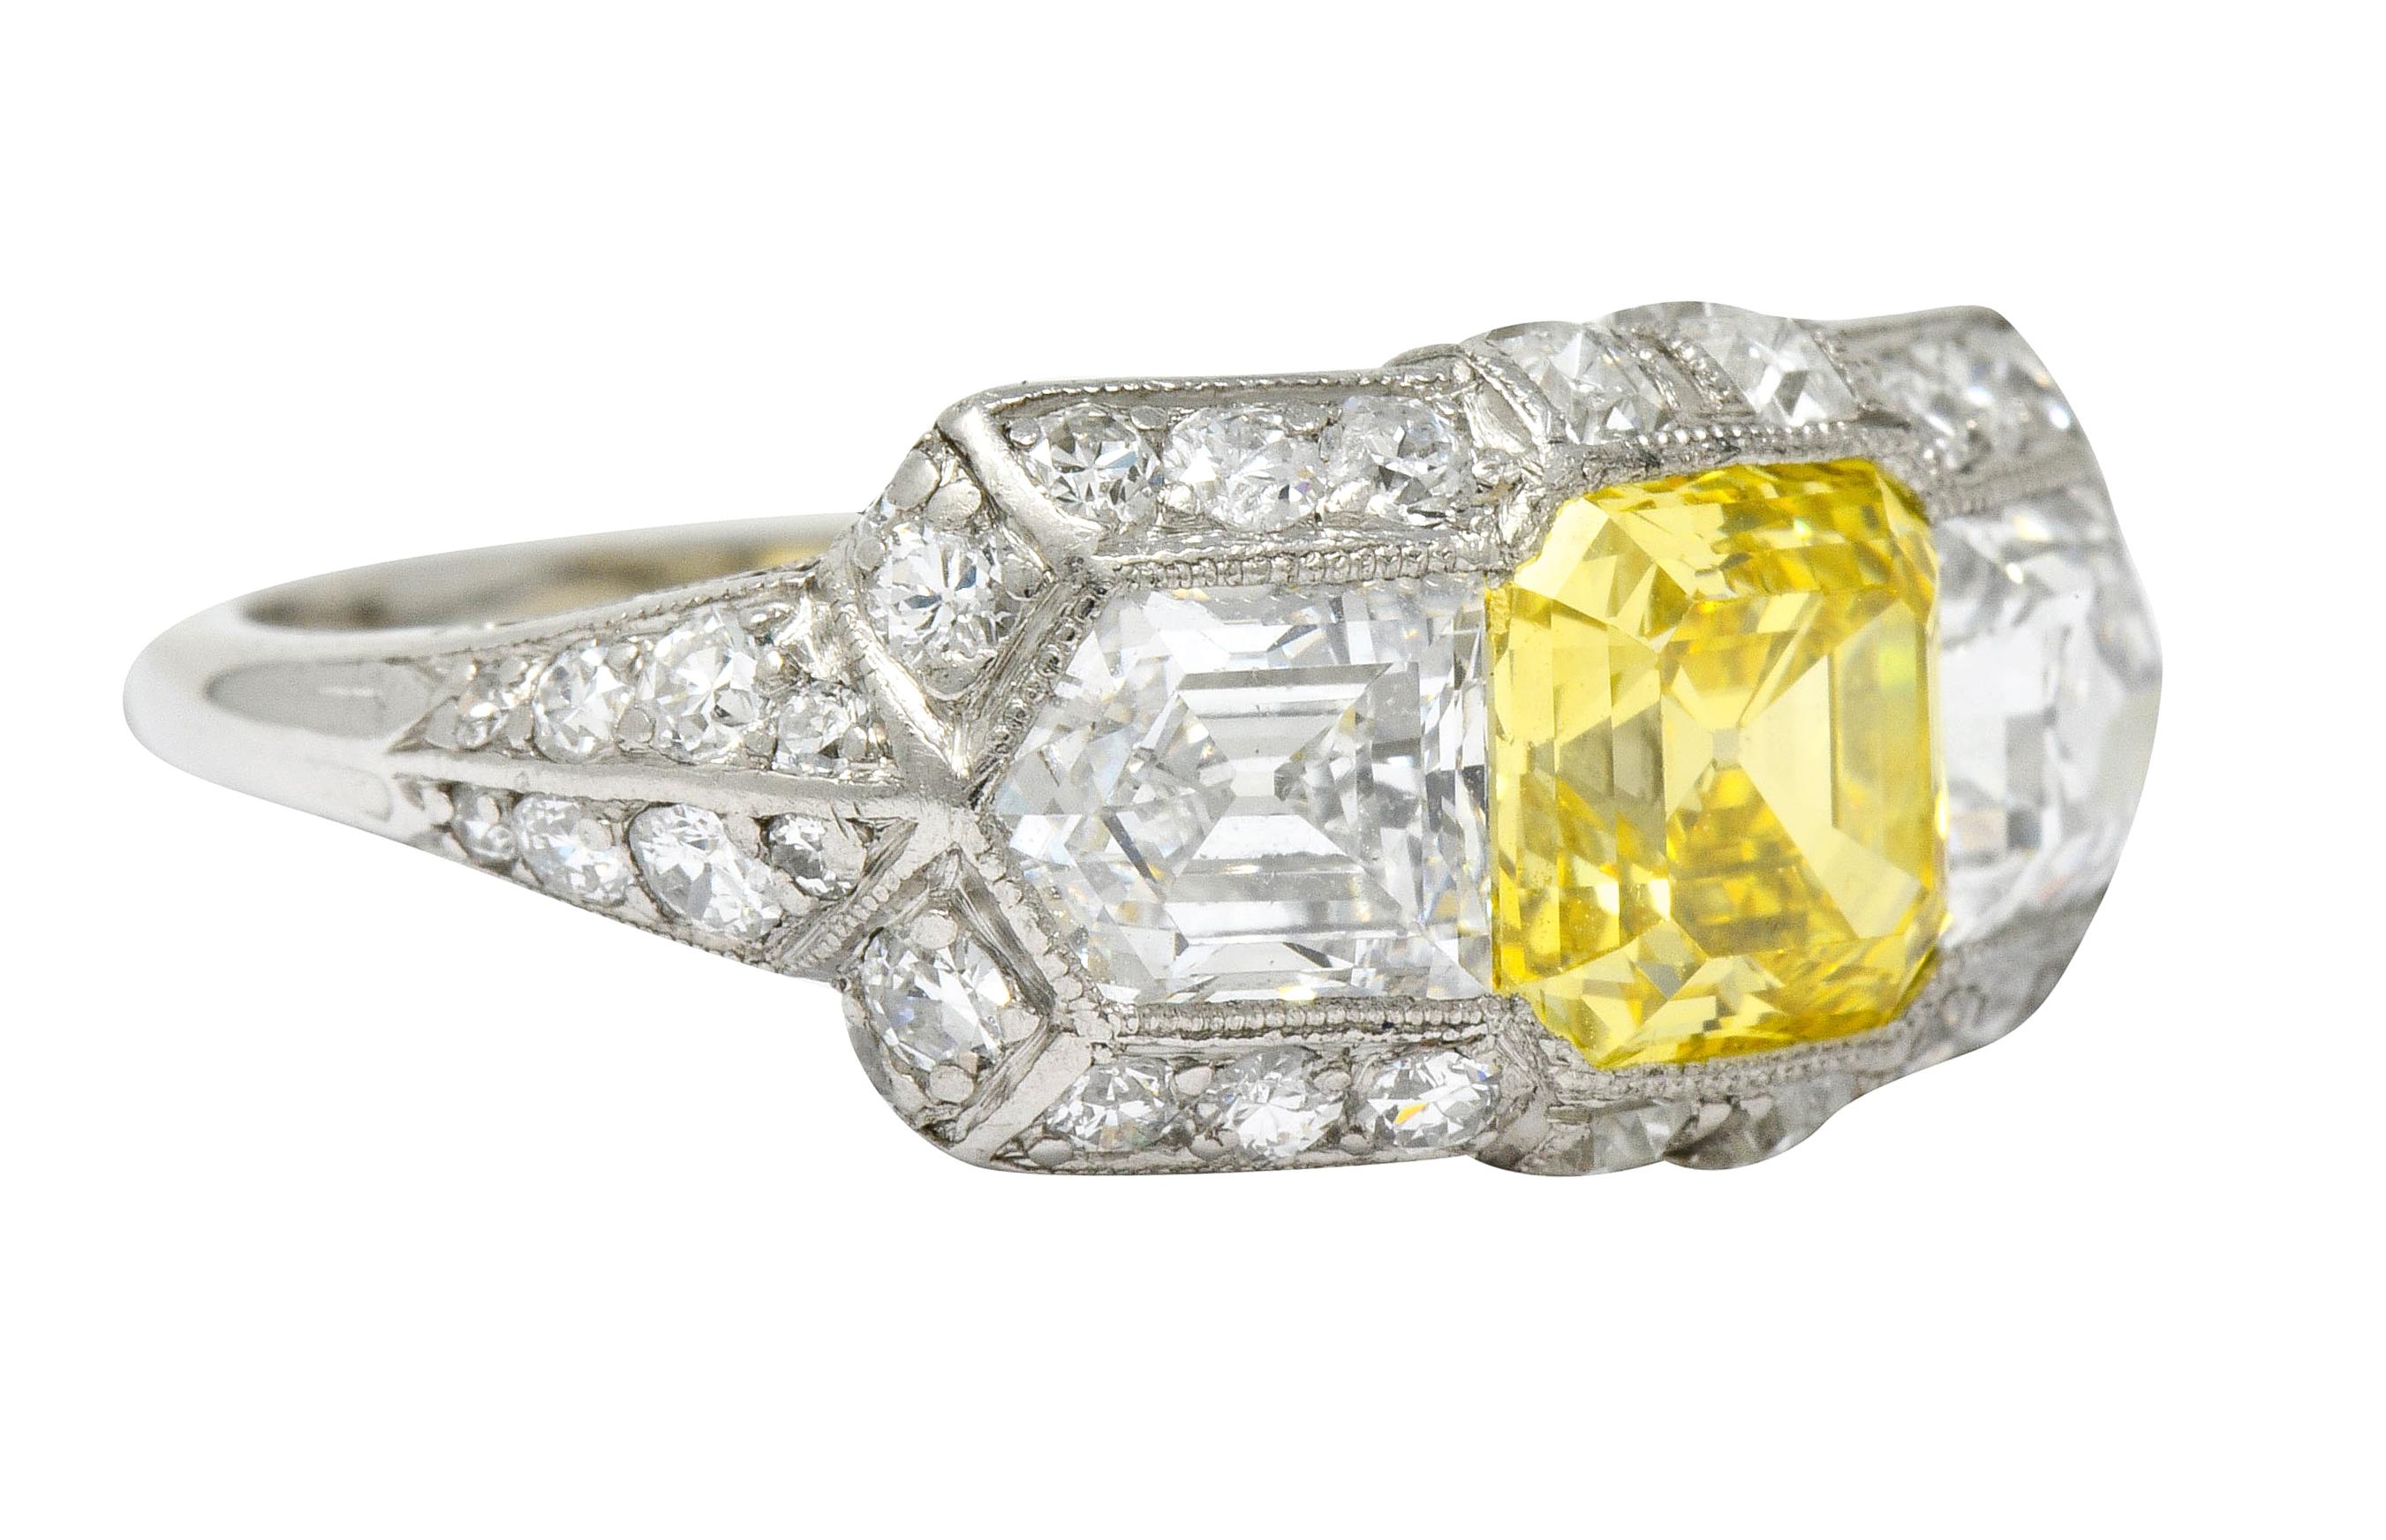 Rectangular mount centers an asscher cut fancy colored diamond weighing 1.43 carats; VS1 clarity and fancy vivid yellow with natural and even color throughout

Flanked by two bullet cut diamonds weighing in total approximately 2.30 carats; D color